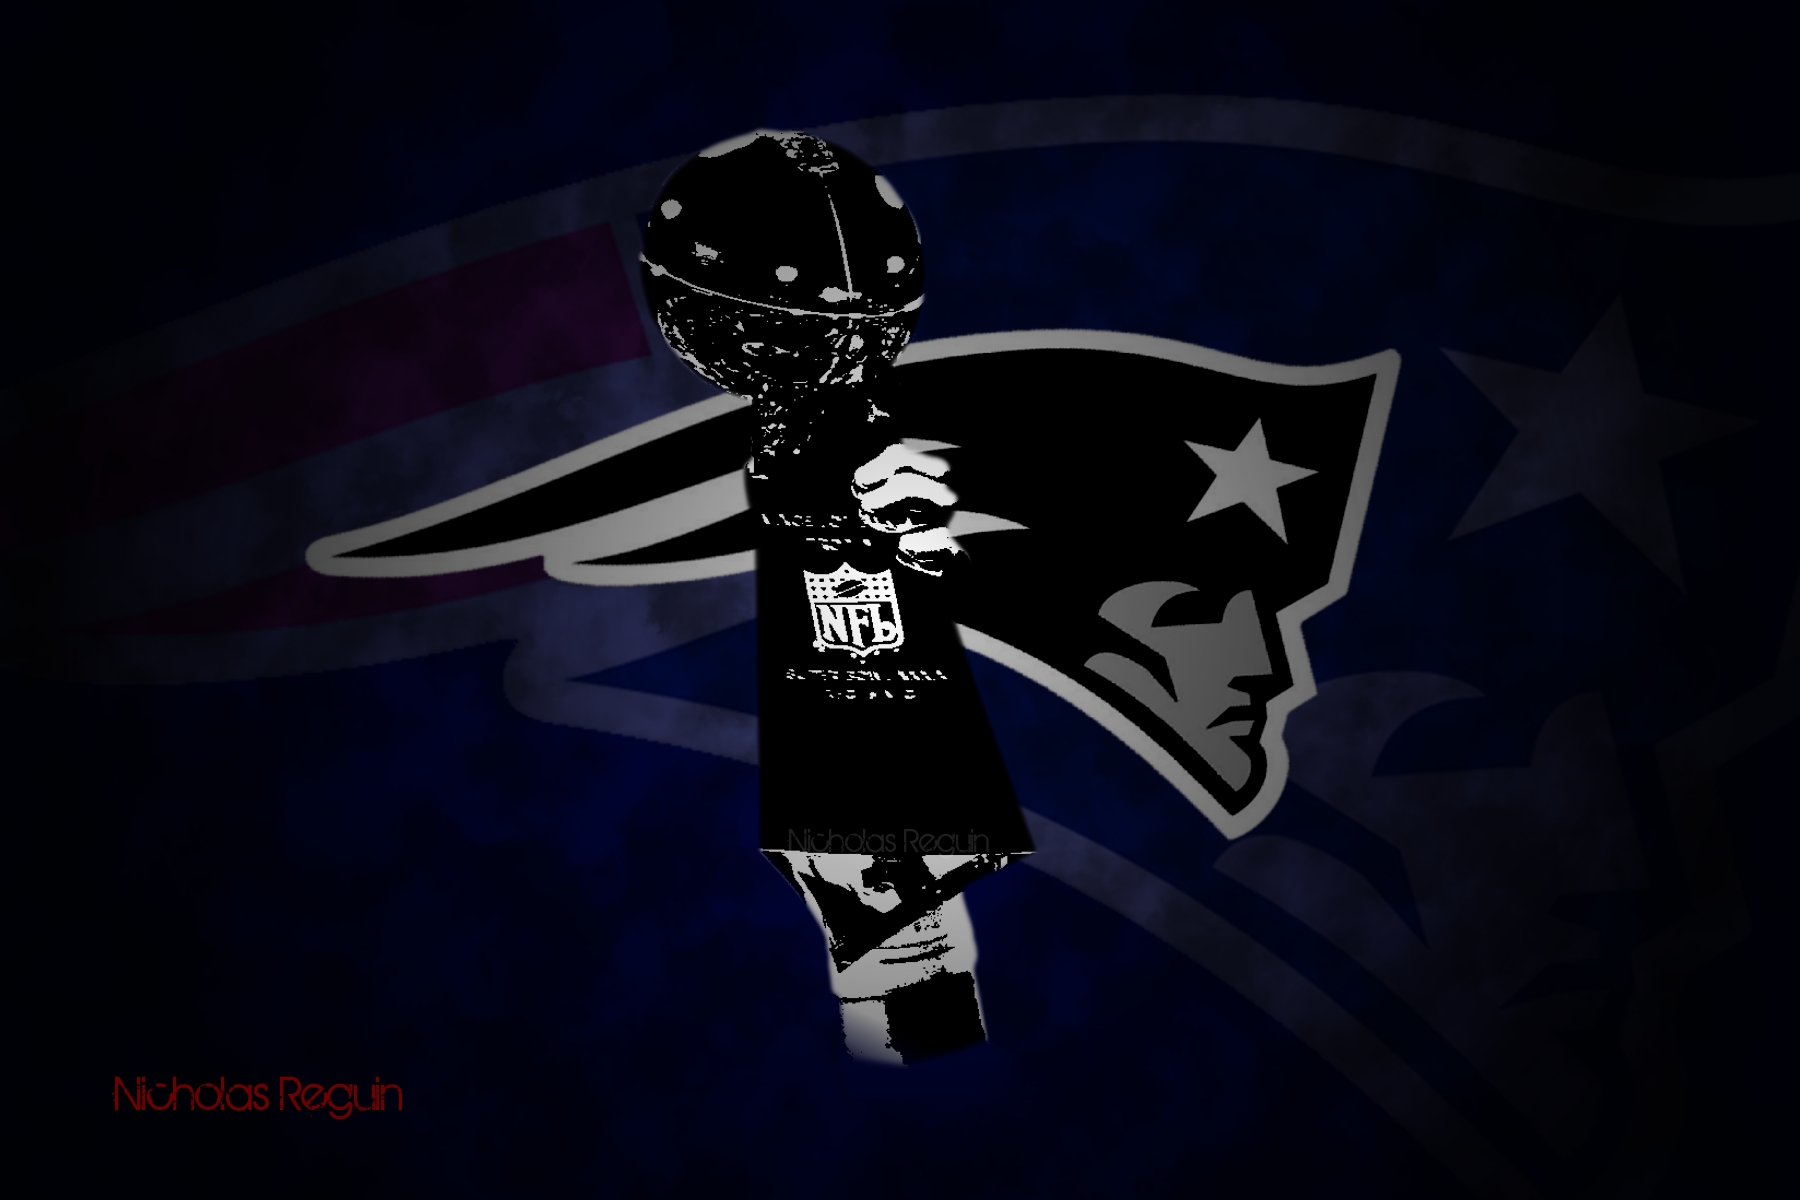 New England Patriots Lombardi Puter Background By Nicholasreguin On